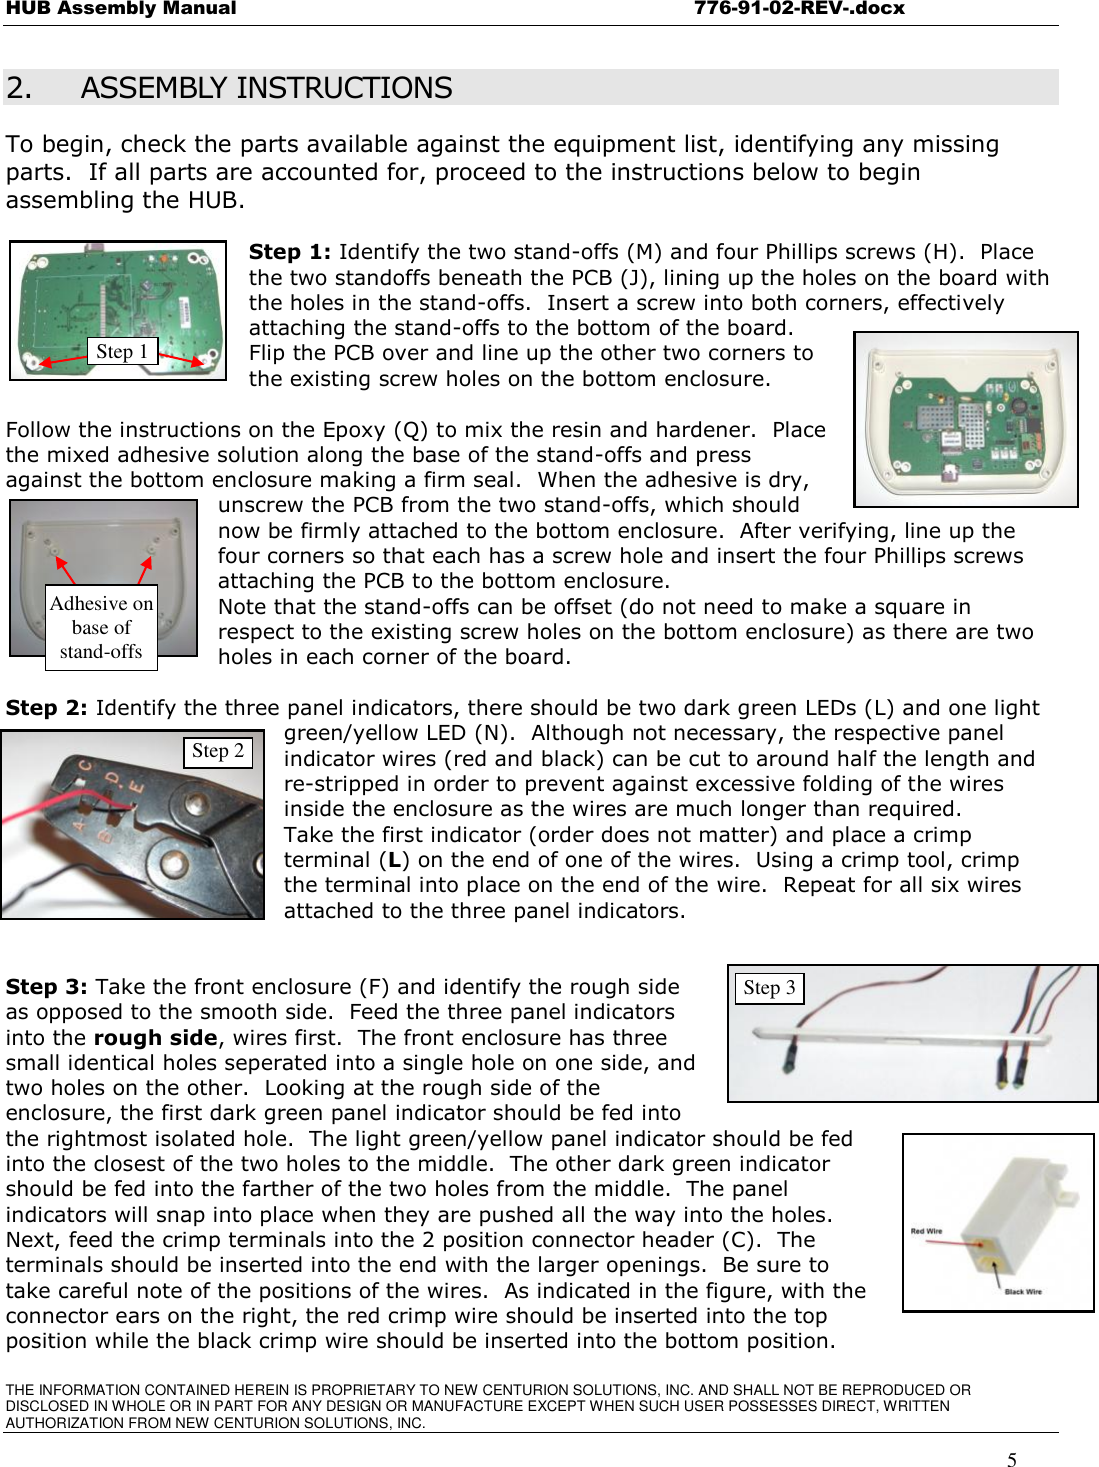 HUB Assembly Manual    776-91-02-REV-.docx THE INFORMATION CONTAINED HEREIN IS PROPRIETARY TO NEW CENTURION SOLUTIONS, INC. AND SHALL NOT BE REPRODUCED OR DISCLOSED IN WHOLE OR IN PART FOR ANY DESIGN OR MANUFACTURE EXCEPT WHEN SUCH USER POSSESSES DIRECT, WRITTEN AUTHORIZATION FROM NEW CENTURION SOLUTIONS, INC.    5 2. ASSEMBLY INSTRUCTIONS To begin, check the parts available against the equipment list, identifying any missing parts.  If all parts are accounted for, proceed to the instructions below to begin assembling the HUB.    Step 1: Identify the two stand-offs (M) and four Phillips screws (H).  Place the two standoffs beneath the PCB (J), lining up the holes on the board with the holes in the stand-offs.  Insert a screw into both corners, effectively attaching the stand-offs to the bottom of the board.   Flip the PCB over and line up the other two corners to the existing screw holes on the bottom enclosure.    Follow the instructions on the Epoxy (Q) to mix the resin and hardener.  Place the mixed adhesive solution along the base of the stand-offs and press against the bottom enclosure making a firm seal.  When the adhesive is dry, unscrew the PCB from the two stand-offs, which should now be firmly attached to the bottom enclosure.  After verifying, line up the four corners so that each has a screw hole and insert the four Phillips screws attaching the PCB to the bottom enclosure.    Note that the stand-offs can be offset (do not need to make a square in respect to the existing screw holes on the bottom enclosure) as there are two holes in each corner of the board.     Step 2: Identify the three panel indicators, there should be two dark green LEDs (L) and one light green/yellow LED (N).  Although not necessary, the respective panel indicator wires (red and black) can be cut to around half the length and re-stripped in order to prevent against excessive folding of the wires inside the enclosure as the wires are much longer than required.   Take the first indicator (order does not matter) and place a crimp terminal (L) on the end of one of the wires.  Using a crimp tool, crimp the terminal into place on the end of the wire.  Repeat for all six wires attached to the three panel indicators.     Step 3: Take the front enclosure (F) and identify the rough side as opposed to the smooth side.  Feed the three panel indicators into the rough side, wires first.  The front enclosure has three small identical holes seperated into a single hole on one side, and two holes on the other.  Looking at the rough side of the enclosure, the first dark green panel indicator should be fed into the rightmost isolated hole.  The light green/yellow panel indicator should be fed into the closest of the two holes to the middle.  The other dark green indicator should be fed into the farther of the two holes from the middle.  The panel indicators will snap into place when they are pushed all the way into the holes. Next, feed the crimp terminals into the 2 position connector header (C).  The terminals should be inserted into the end with the larger openings.  Be sure to take careful note of the positions of the wires.  As indicated in the figure, with the connector ears on the right, the red crimp wire should be inserted into the top position while the black crimp wire should be inserted into the bottom position.   Step 1 Step 2 Step 3 Adhesive on base of stand-offs 